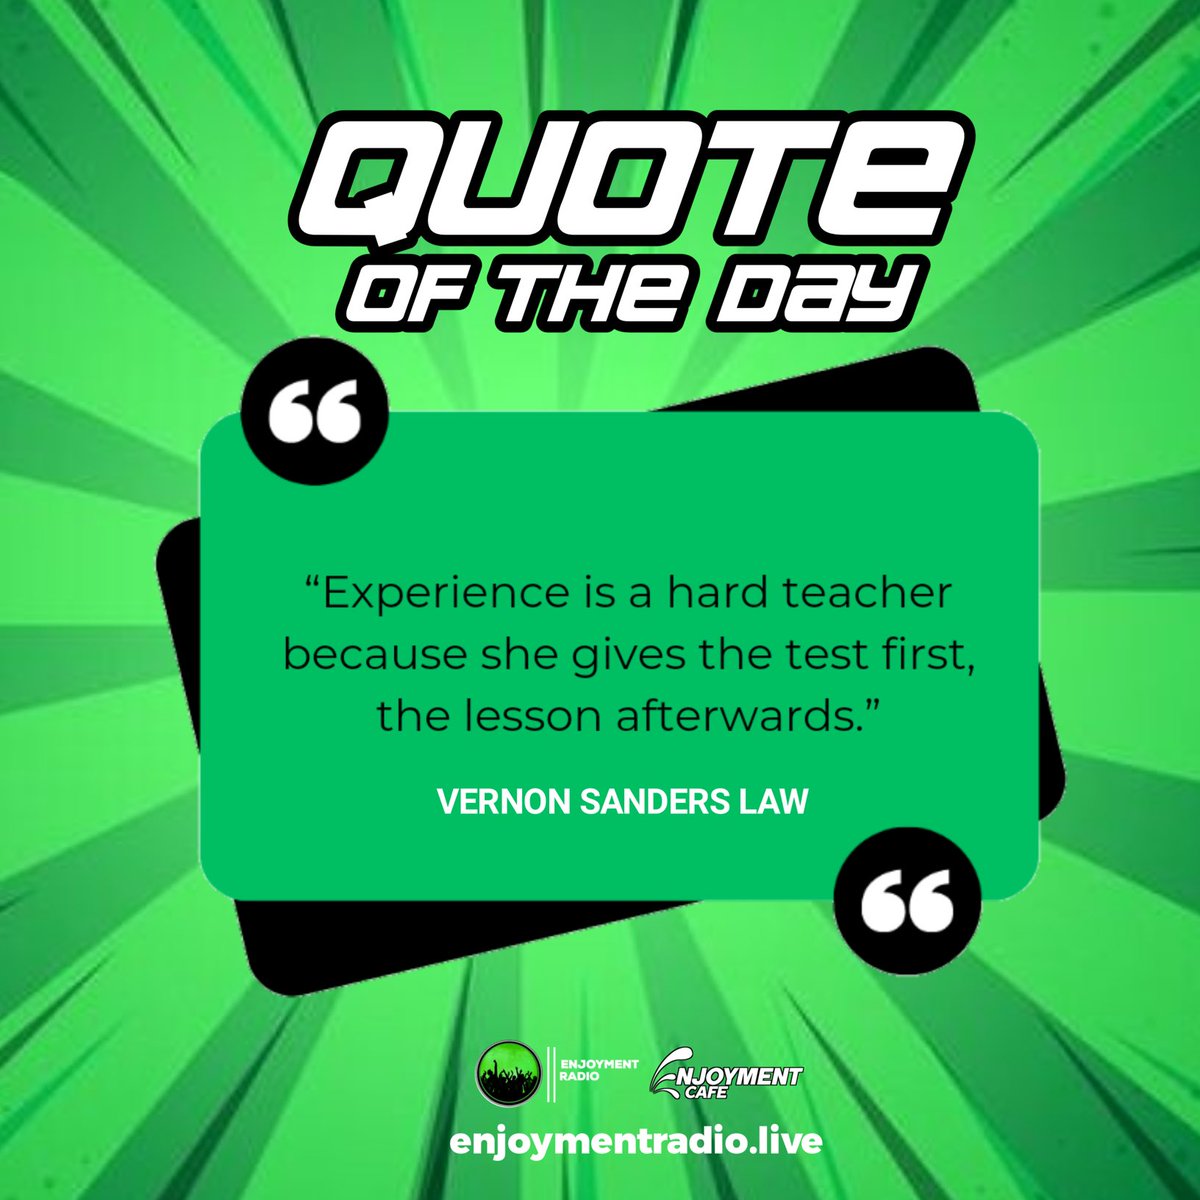 ✳🟩QUOTE OF THE DAY⬛❇
 BY:- Vernon Sanders Law

Let Us know what experience has taught you in the comment section...
#BeInspired💯
#EnjoymentCafe ☕☕
#EnjoymentRadio 
#OnlineRadio 📻
#Inspiration #Accra #ghana #Motivaton #QuoteOfTheDay #BeTheChange